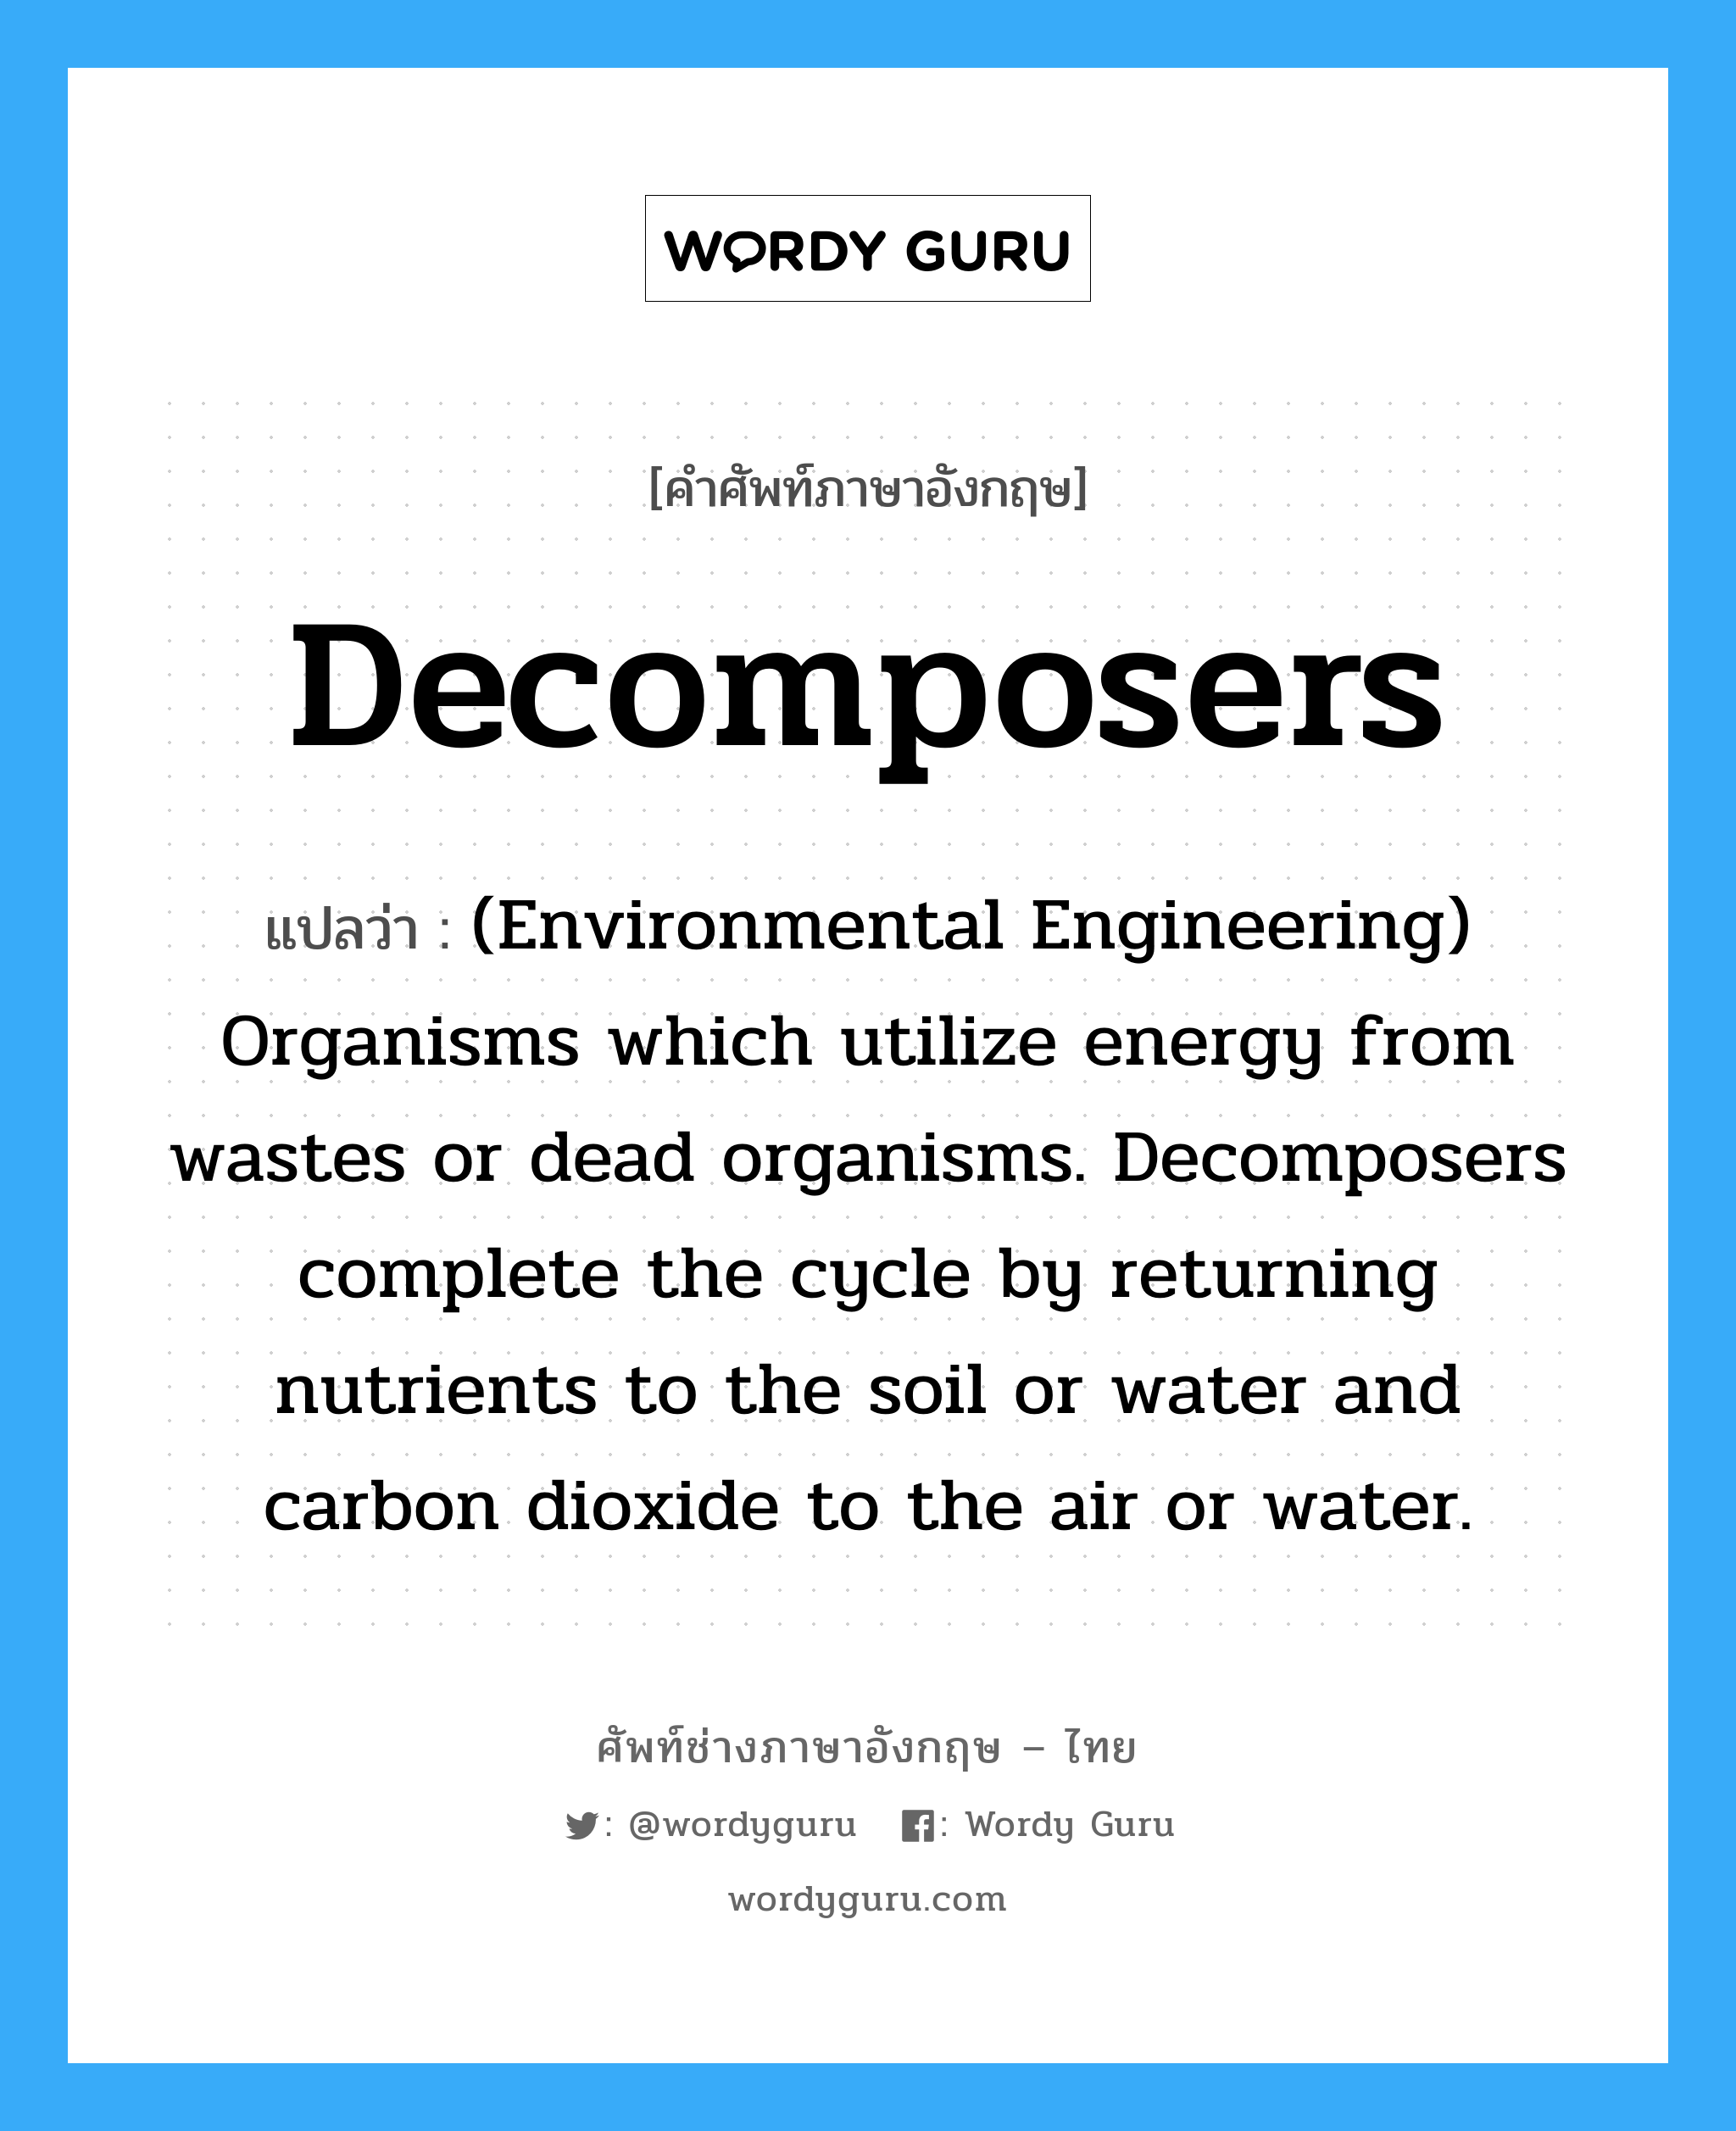 Decomposers แปลว่า?, คำศัพท์ช่างภาษาอังกฤษ - ไทย Decomposers คำศัพท์ภาษาอังกฤษ Decomposers แปลว่า (Environmental Engineering) Organisms which utilize energy from wastes or dead organisms. Decomposers complete the cycle by returning nutrients to the soil or water and carbon dioxide to the air or water.